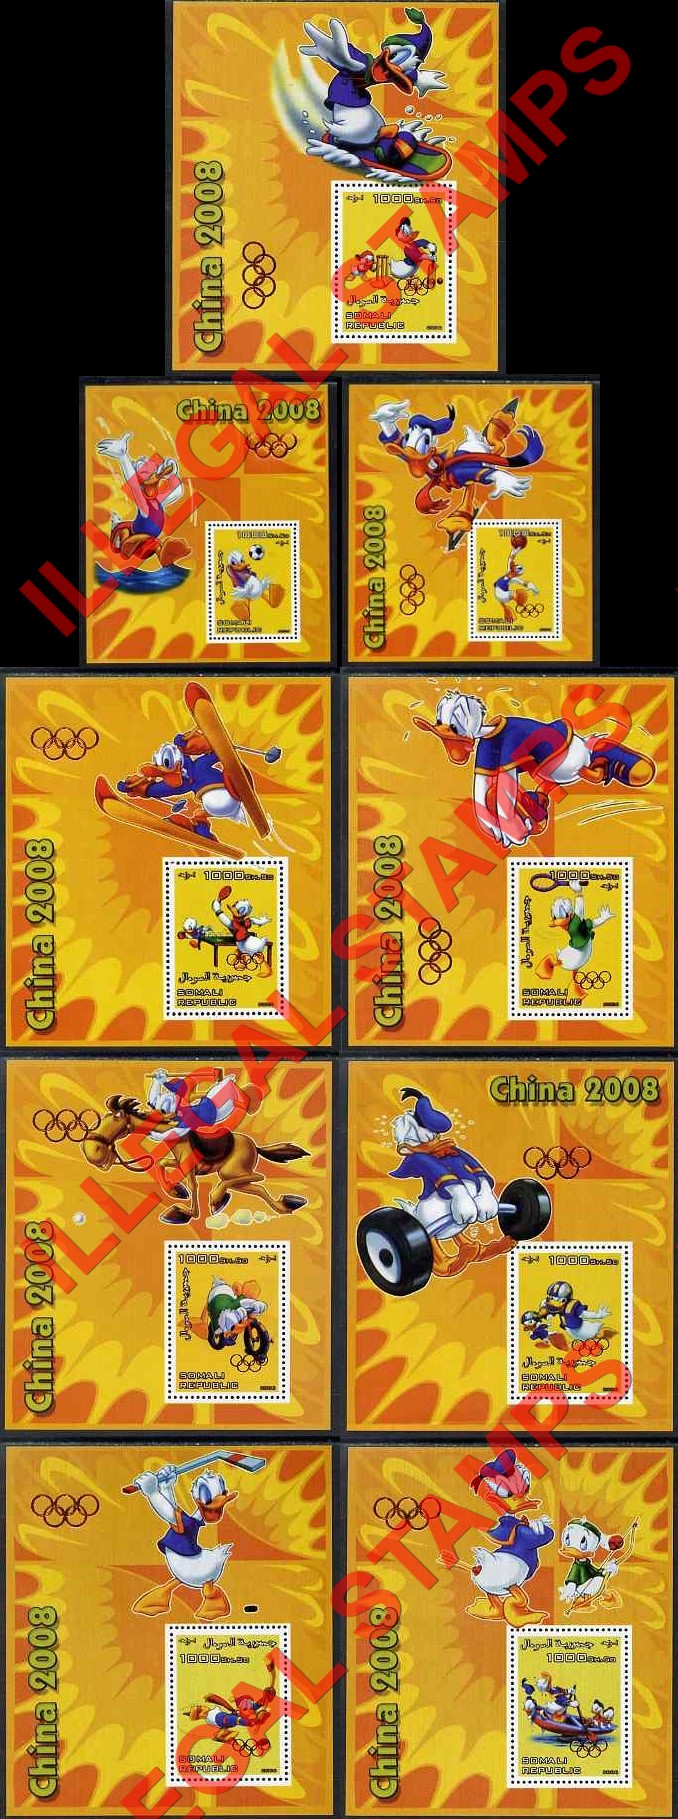 Somalia 2006 Donald Duck China 2008 Olympics Illegal Stamp Souvenir Sheets of 1 With Olympic Ring Overprints on the Souvenir Sheet